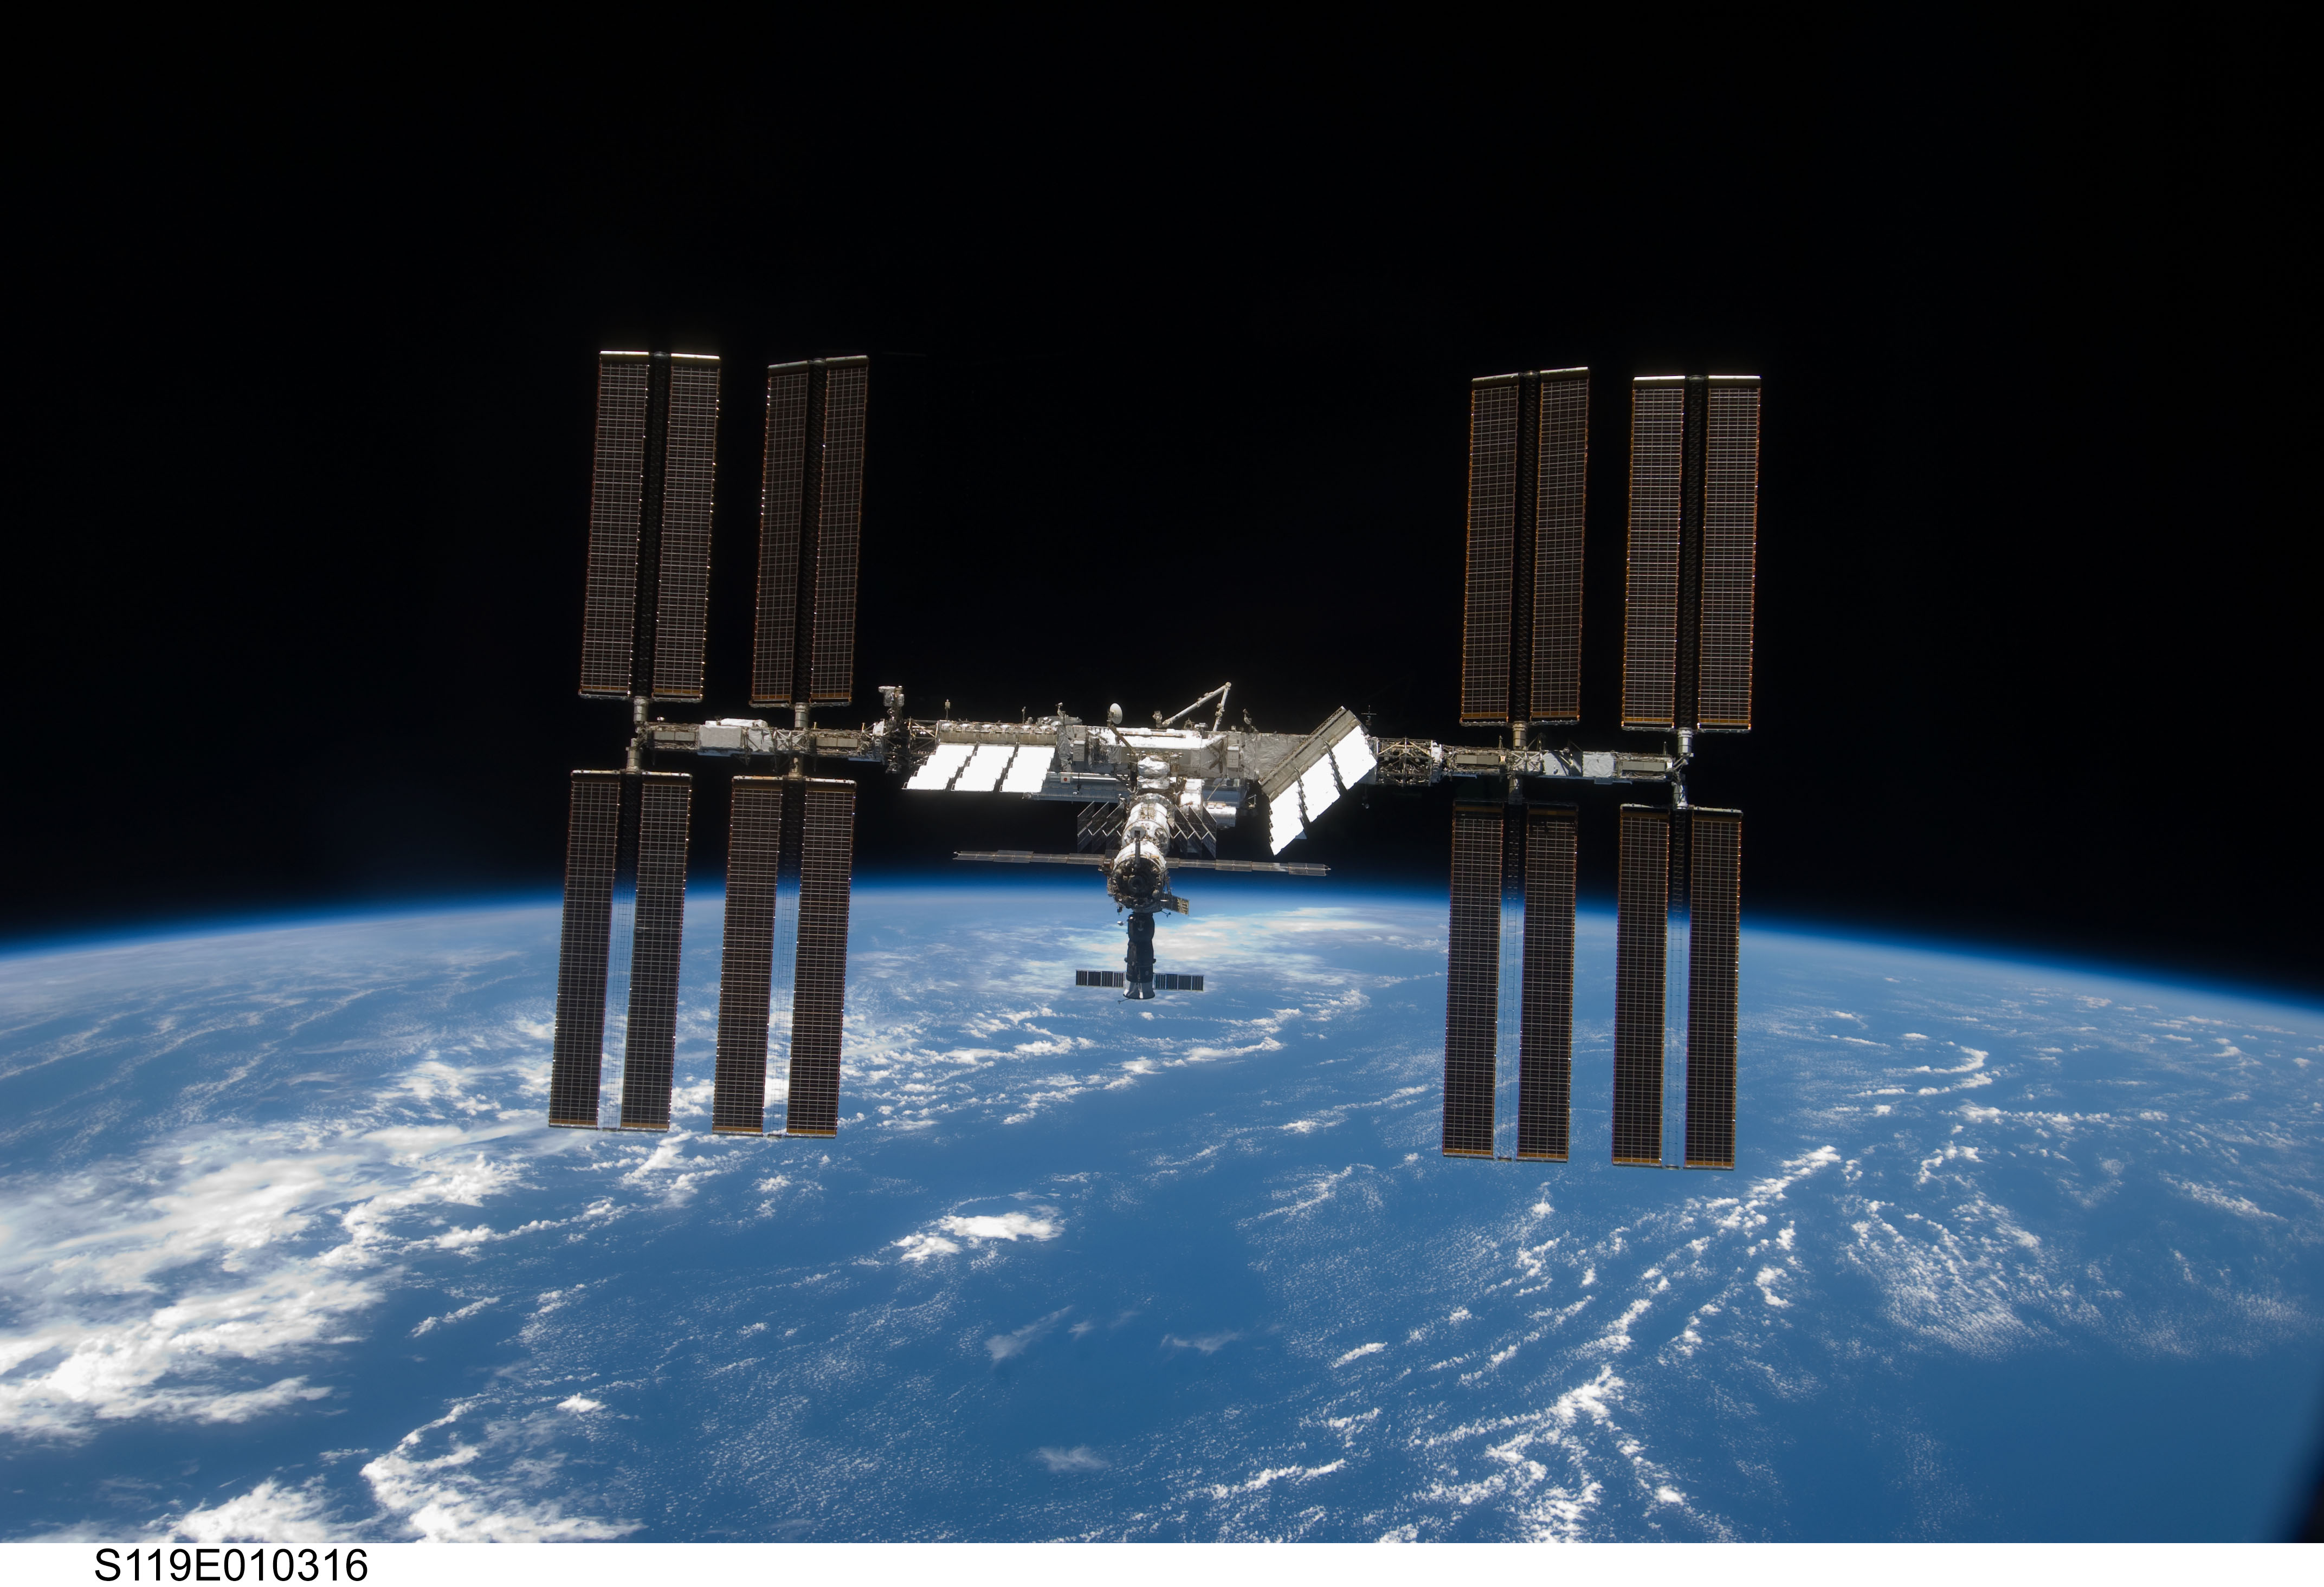 APOD: 2009 April 6  The International Space Station Expands Again